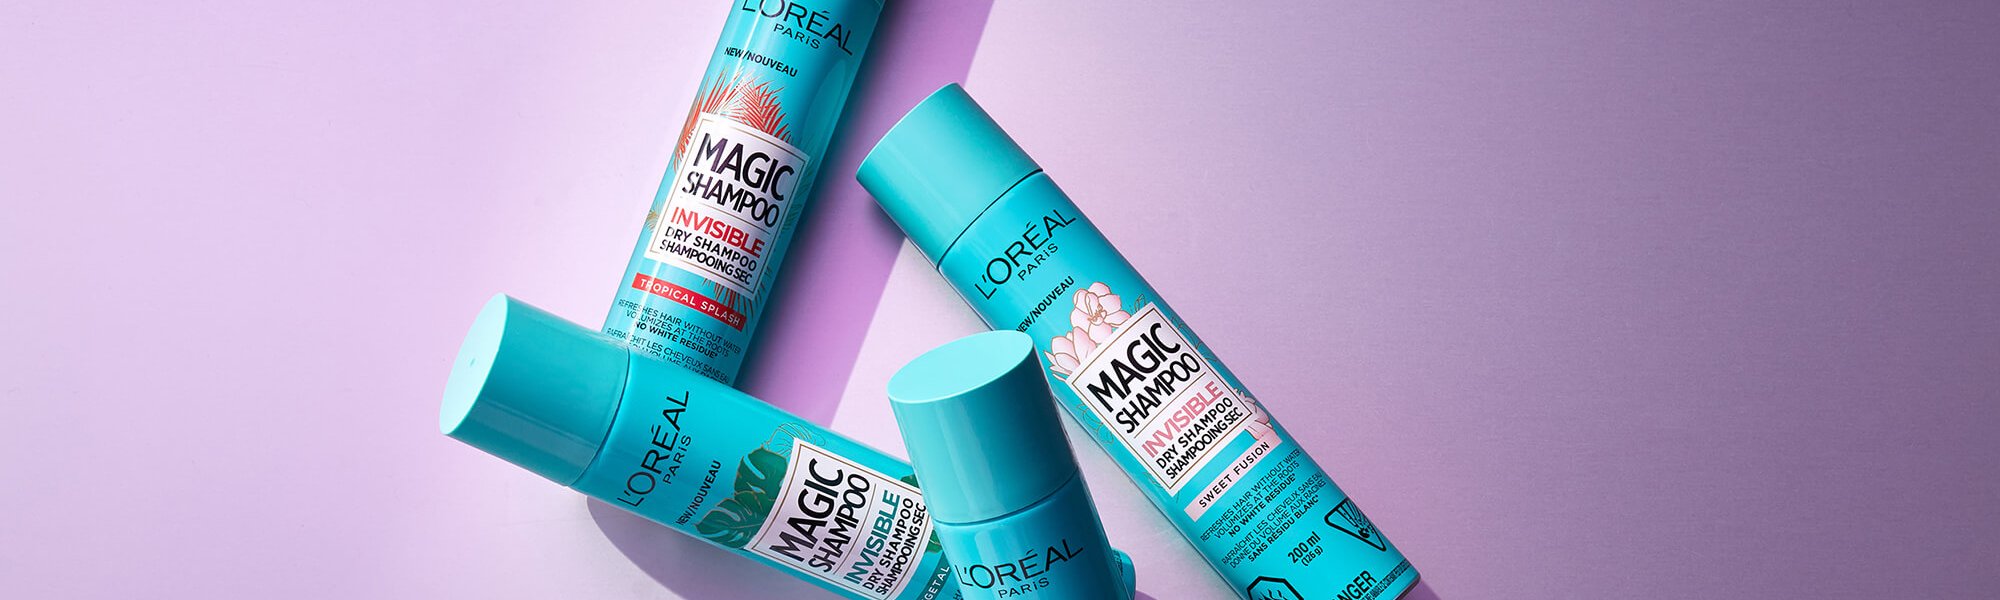 Brilliant Dry Shampoo Hacks You Need In Your Life